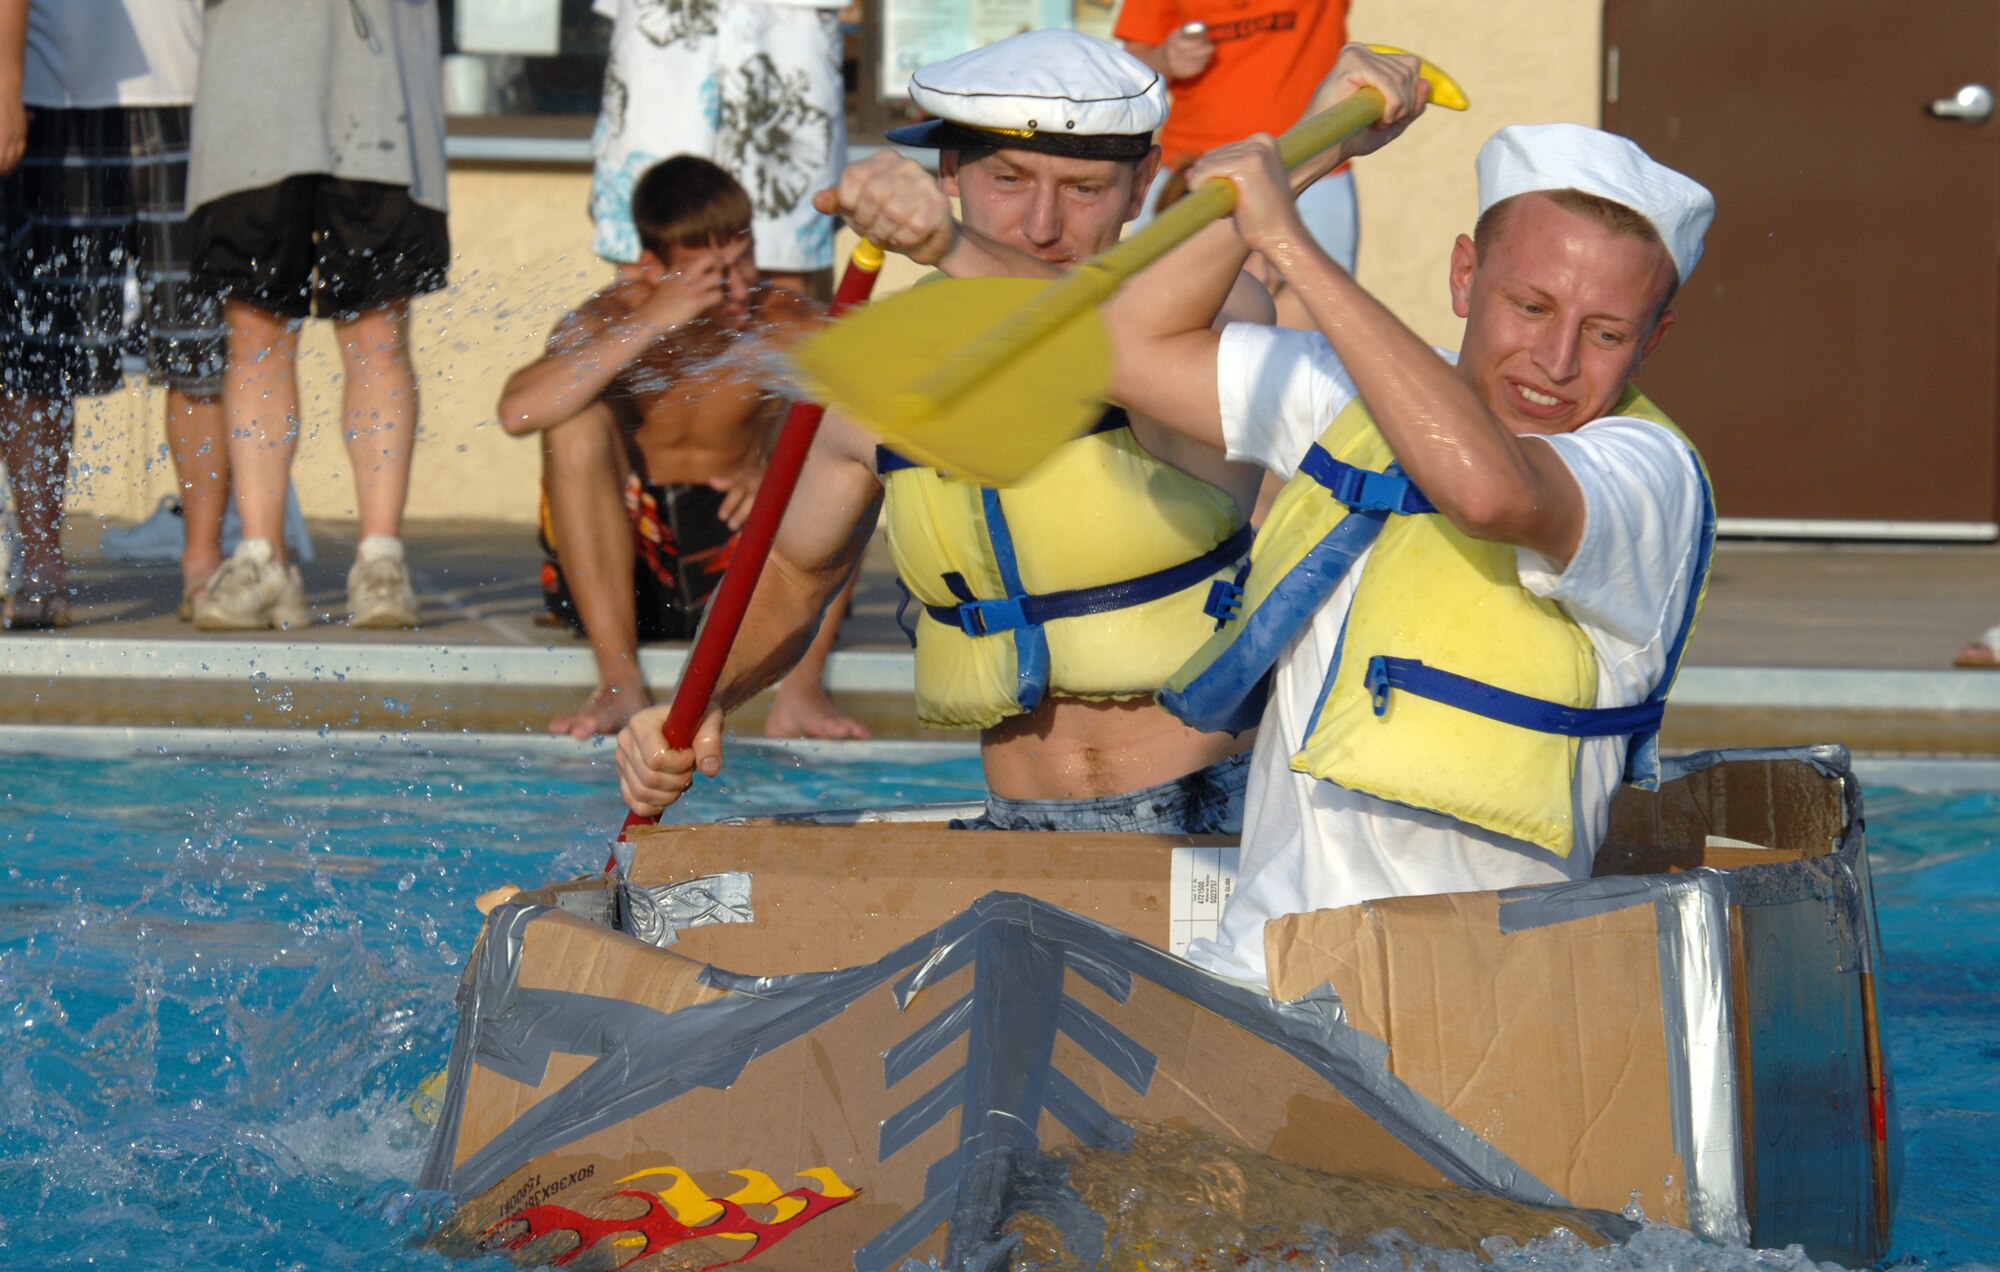 WHITEMAN AIR FORCE BASE, Mo. -- Senior Airman Robert Heidenreich (front) and Staff Sgt. Joshua Hollingshead, both from the 509th Maintenance Squadron, race across the base pool in the S.S. Minnom to a 1st place finish with a time of 14 seconds during the 509th Services Squadron’s Build-a-Boat contest July 20. More than 10 teams had 40 minutes to construct race-worthy boats of cardboard and duct tape. (U.S. Air Force photo/Airman 1st Class Stephen Linch)

